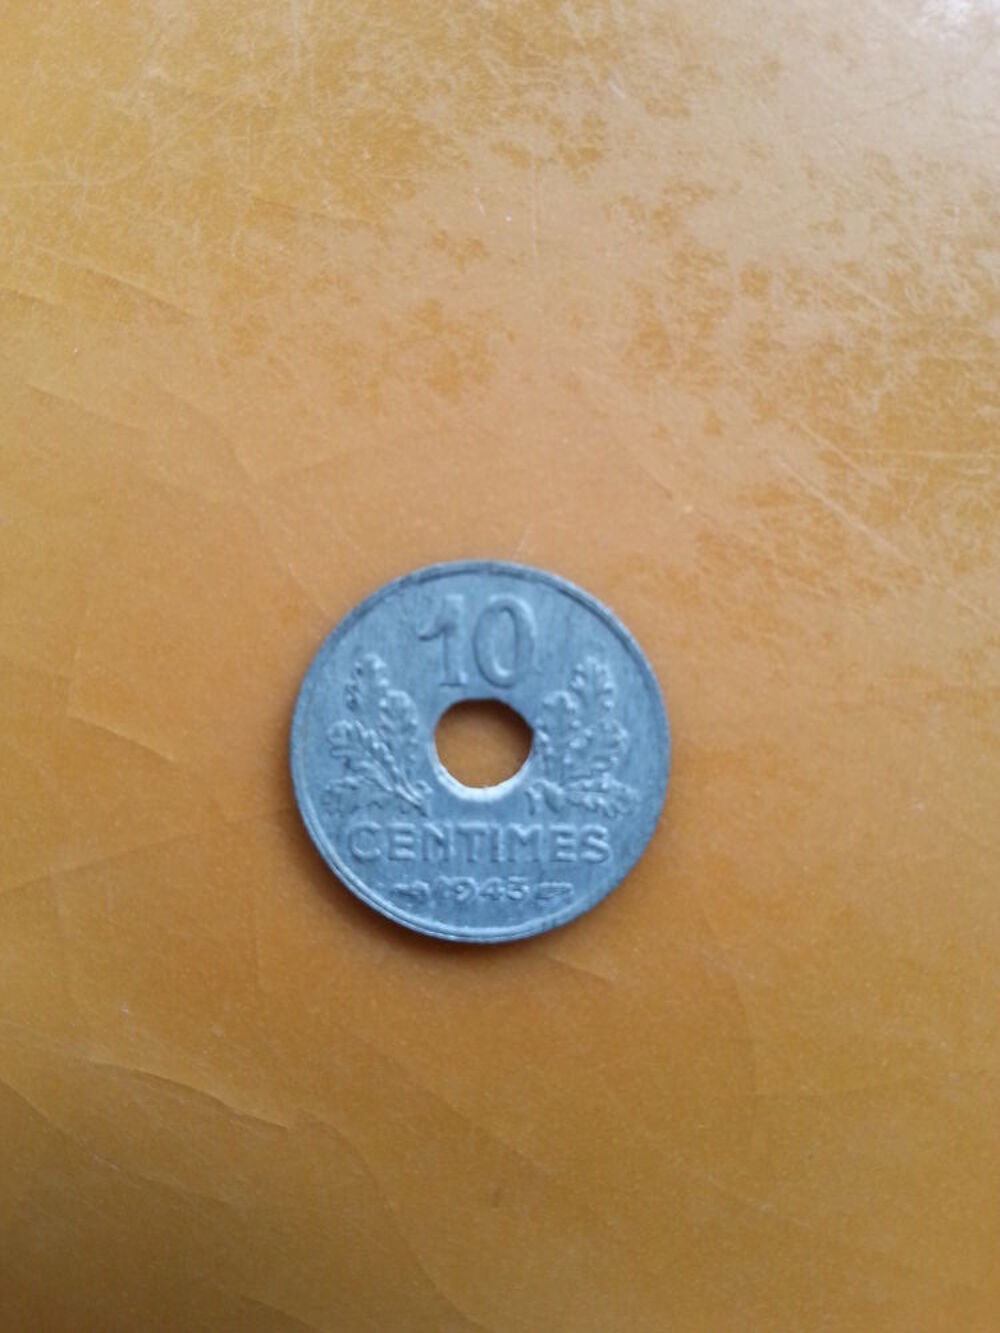 10 centimes zing 